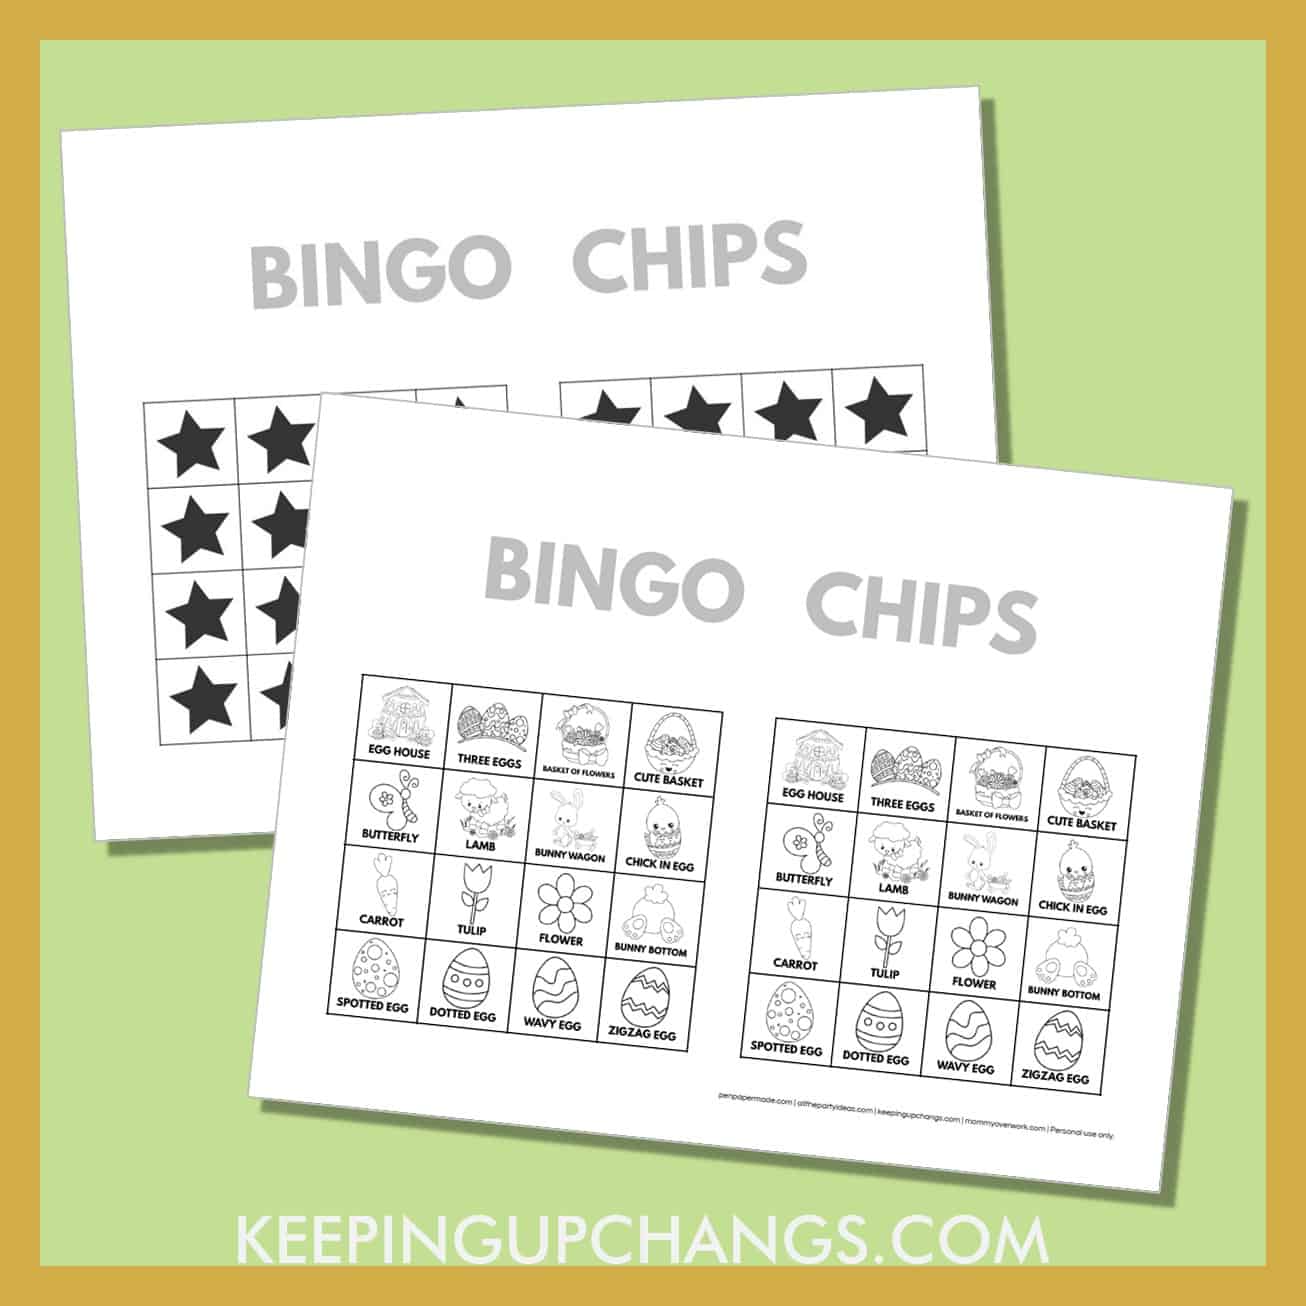 free easter day bingo card 4x4 black white coloring game chips, tokens, markers.